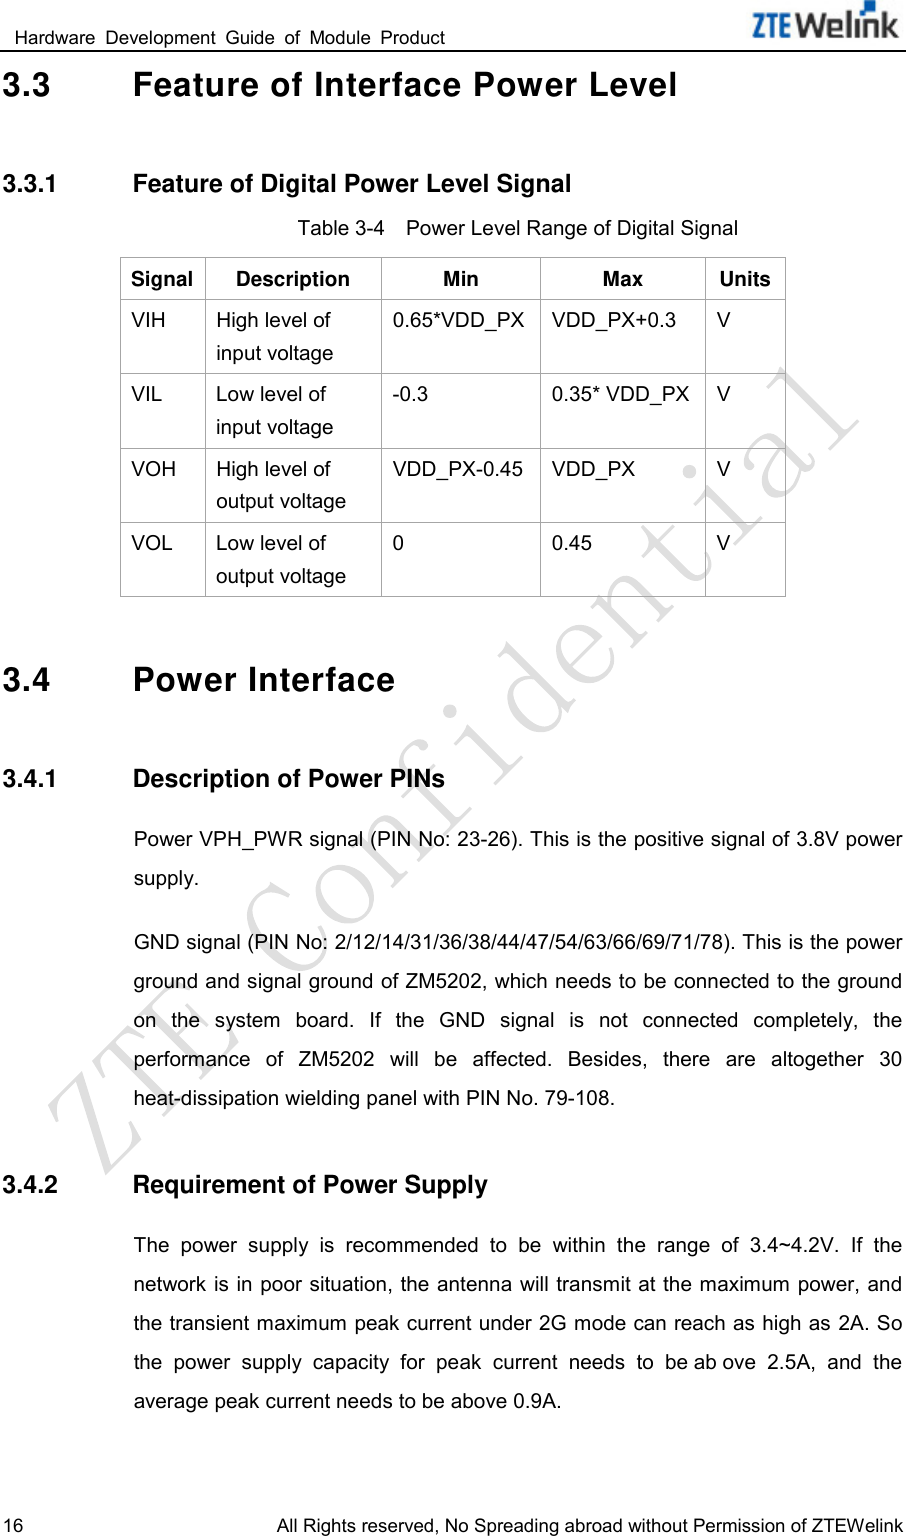  Hardware  Development  Guide  of  Module  Product                                                               16 All Rights reserved, No Spreading abroad without Permission of ZTEWelink 3.3 Feature of Interface Power Level 3.3.1 Feature of Digital Power Level Signal Table 3-4    Power Level Range of Digital Signal Signal Description Min Max Units VIH High level of input voltage 0.65*VDD_PX VDD_PX+0.3  V VIL Low level of input voltage -0.3 0.35* VDD_PX  V VOH High level of output voltage VDD_PX-0.45 VDD_PX  V VOL Low level of output voltage 0  0.45  V 3.4 Power Interface 3.4.1 Description of Power PINs Power VPH_PWR signal (PIN No: 23-26). This is the positive signal of 3.8V power supply.   GND signal (PIN No: 2/12/14/31/36/38/44/47/54/63/66/69/71/78). This is the power ground and signal ground of ZM5202, which needs to be connected to the ground on  the  system  board.  If  the  GND  signal  is  not  connected  completely,  the performance  of ZM5202  will  be  affected.  Besides,  there  are  altogether  30 heat-dissipation wielding panel with PIN No. 79-108.   3.4.2 Requirement of Power Supply The  power  supply  is  recommended  to  be  within  the  range  of  3.4~4.2V.  If  the network is in poor situation, the antenna will transmit at the maximum power, and the transient maximum peak current under 2G mode can reach as high as 2A. So the  power  supply  capacity  for  peak  current  needs  to  be ab ove  2.5A,  and  the average peak current needs to be above 0.9A.   